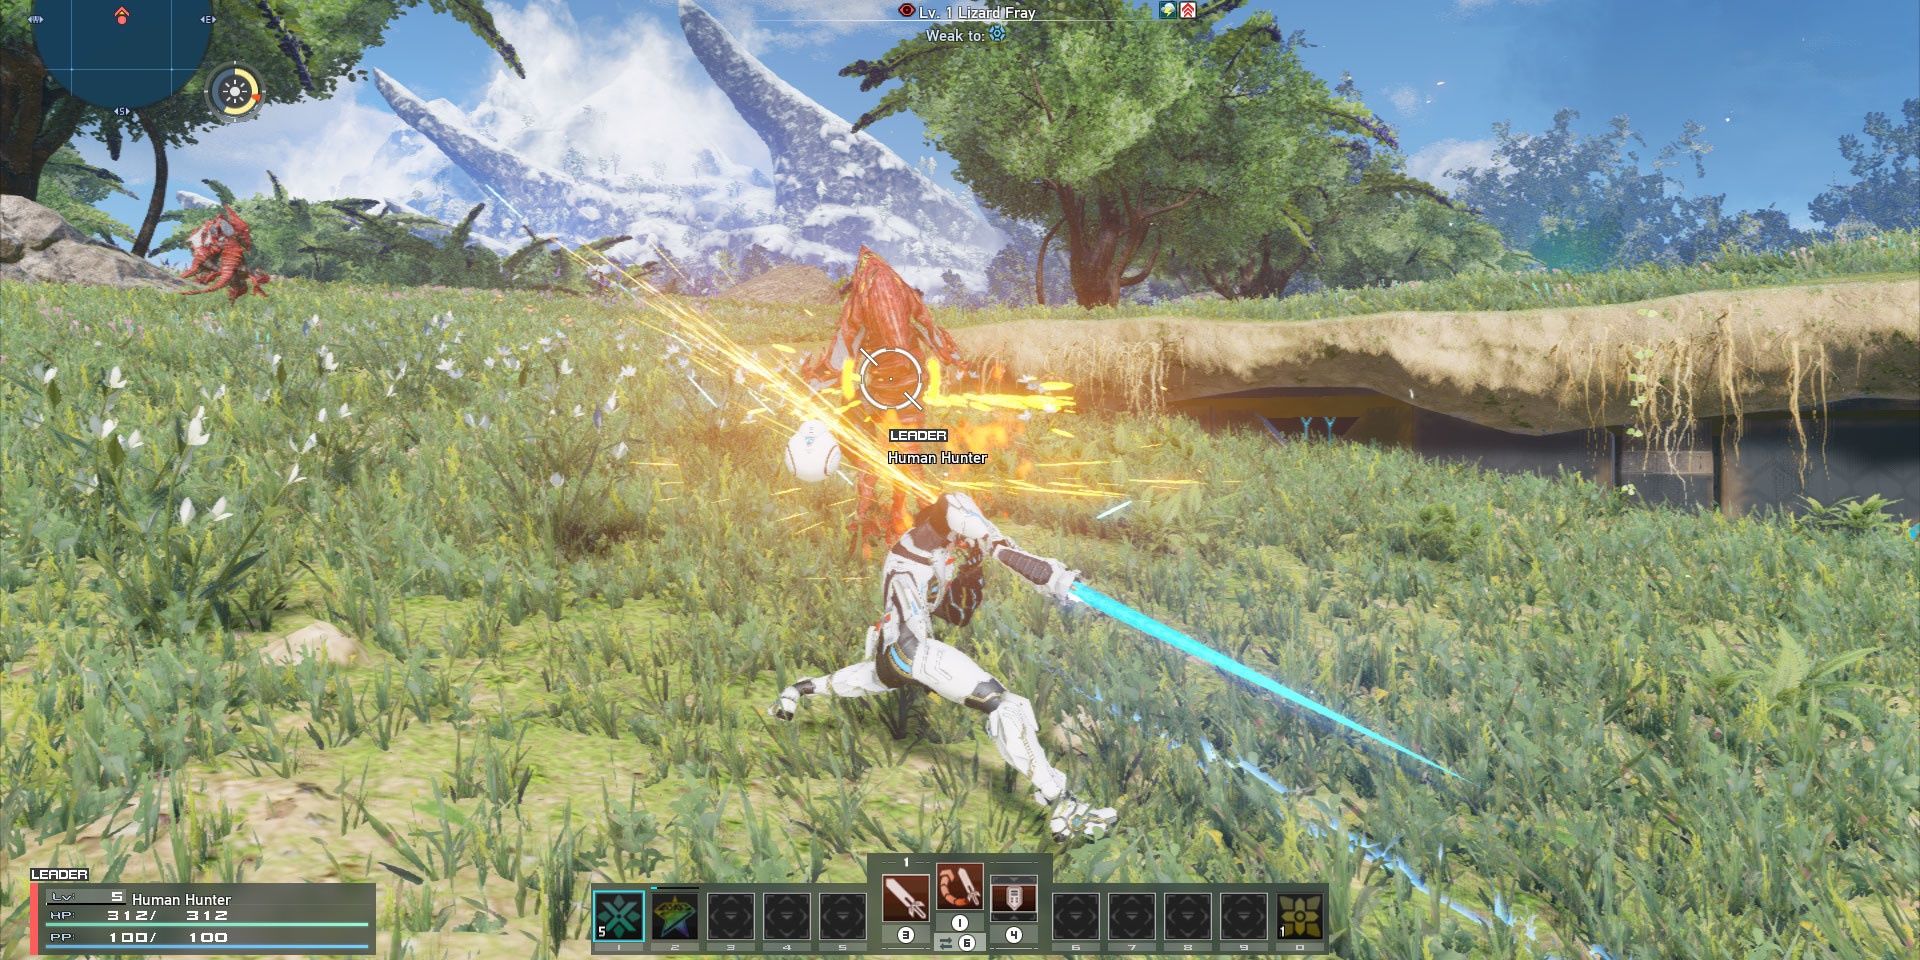 Image of gameplay from the game Phantasy Star Online 2.